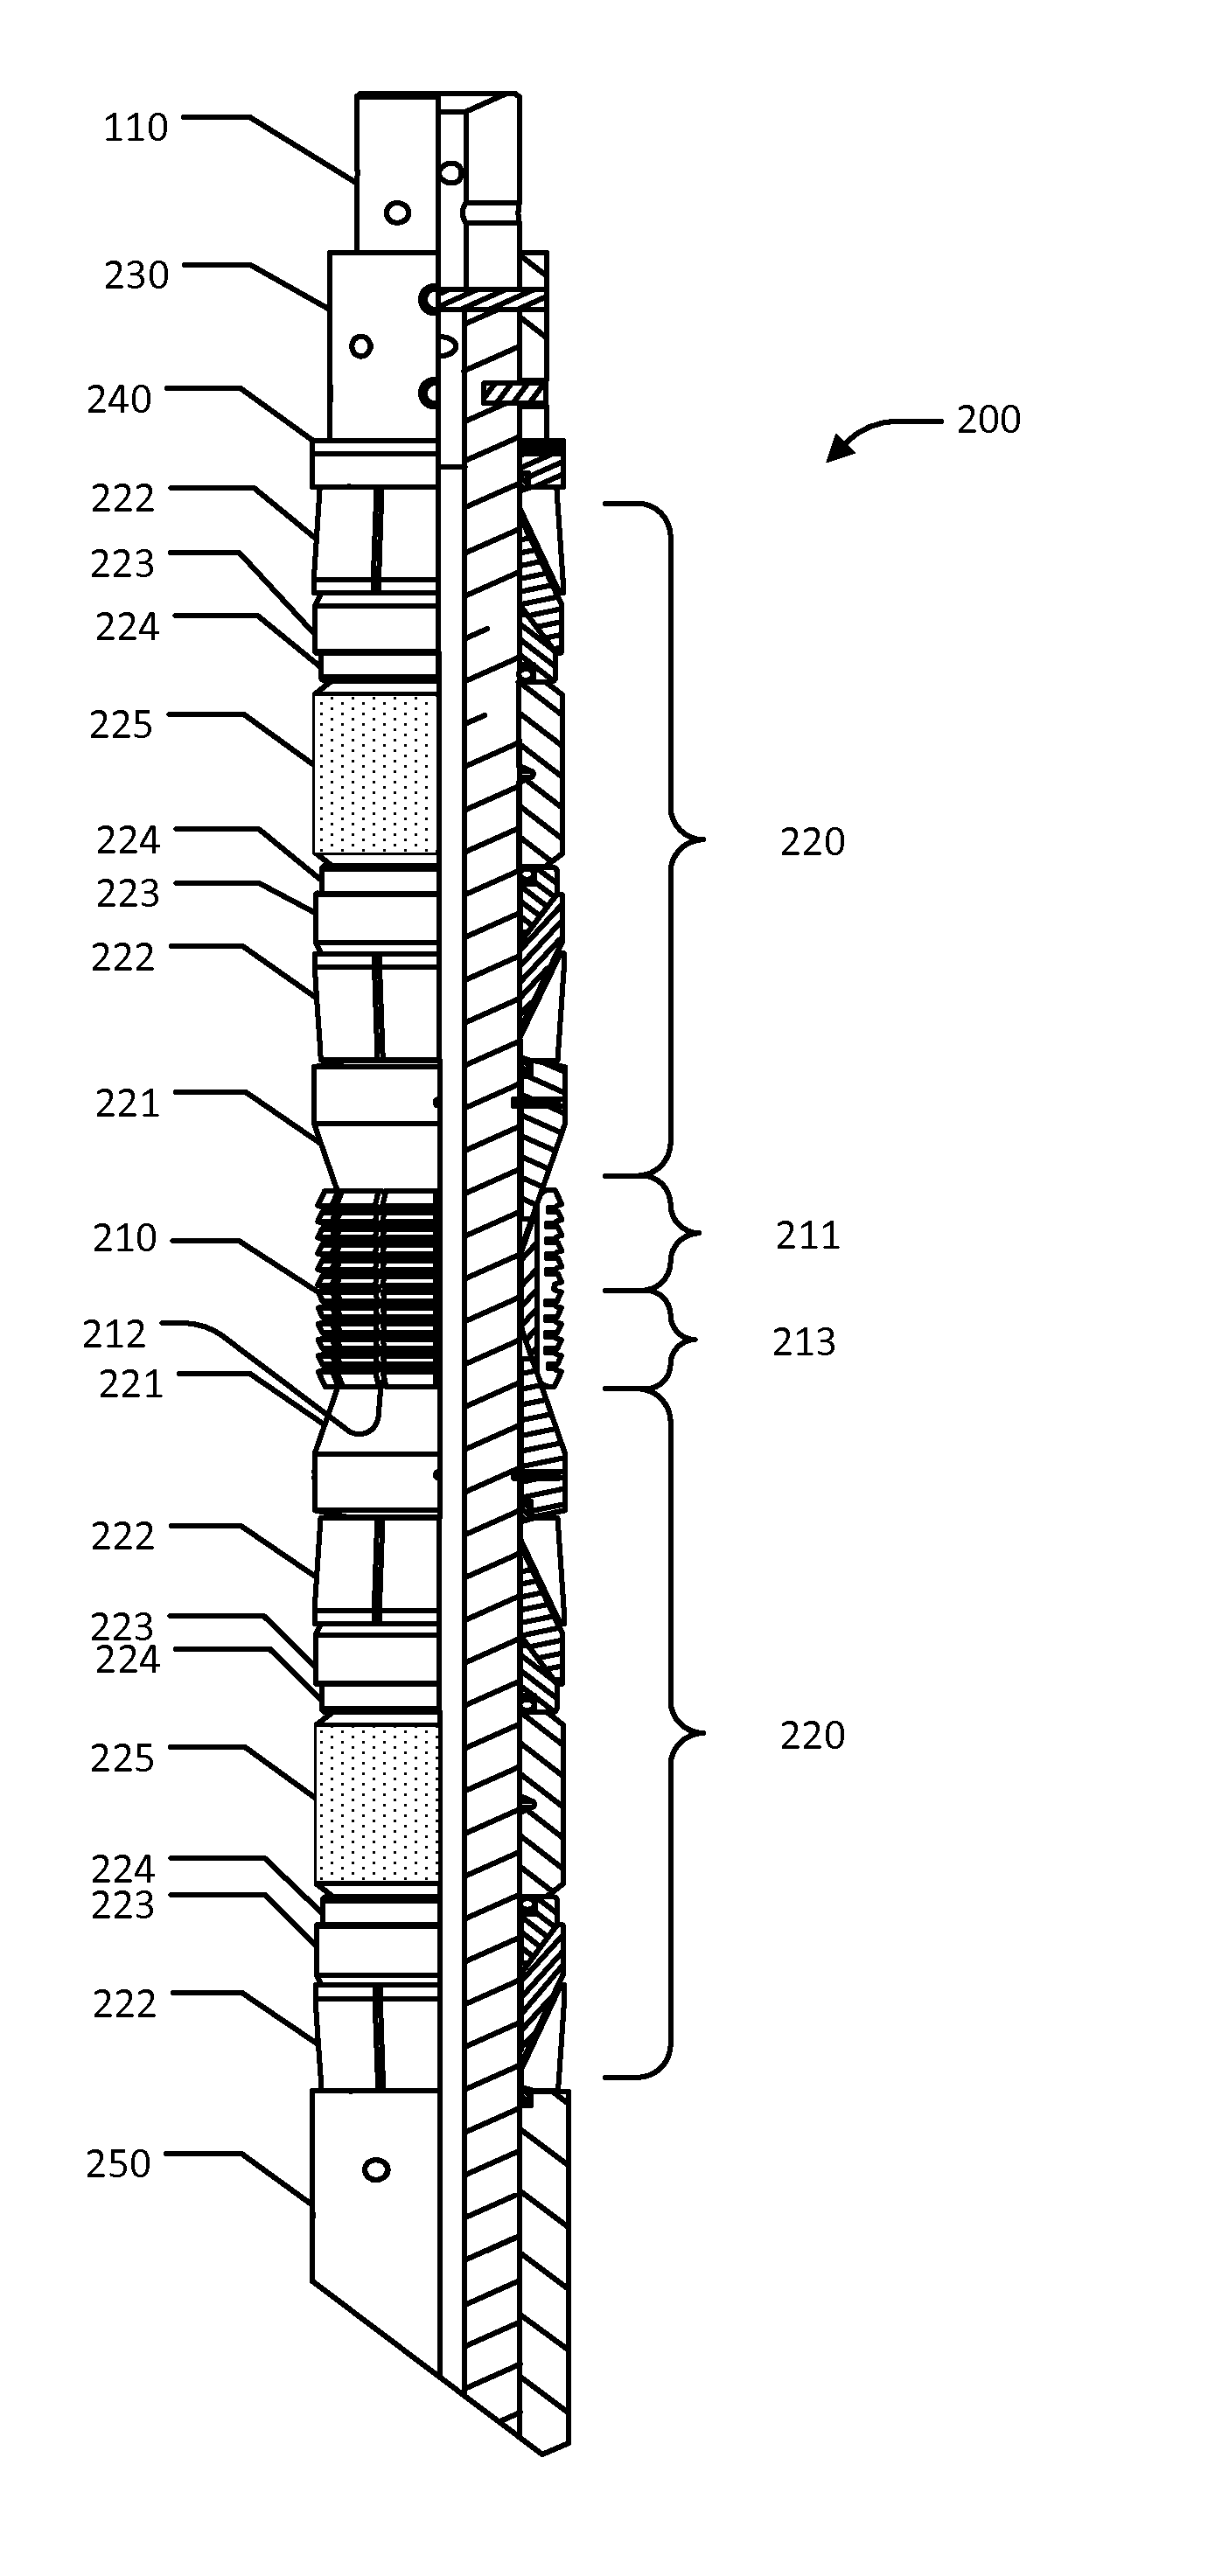 Composite downhole tool with reduced slip volume